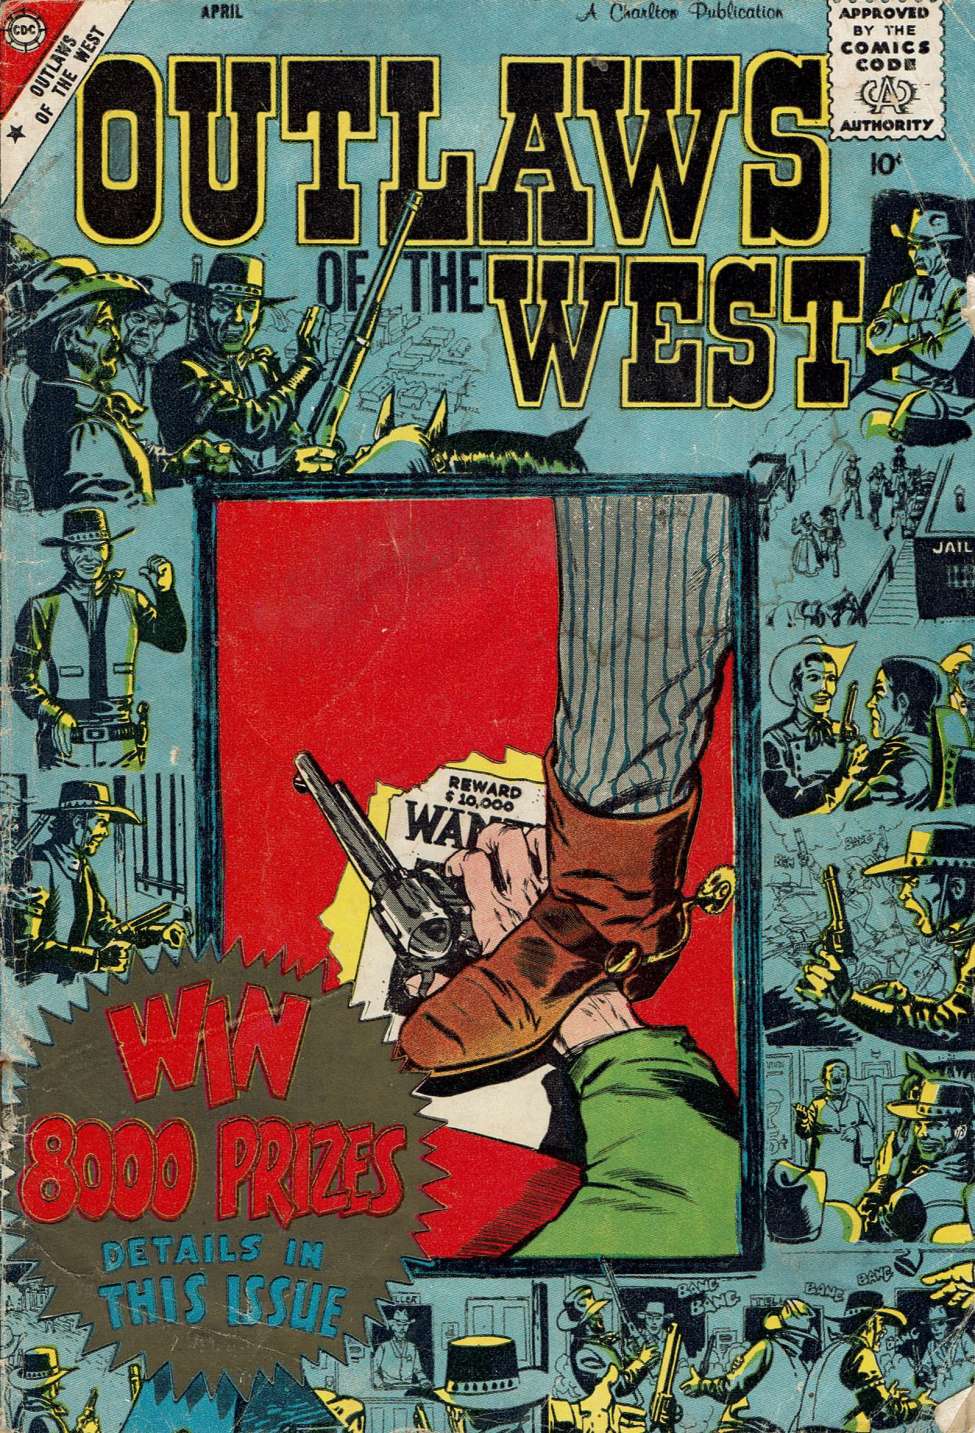 Book Cover For Outlaws of the West 19 - Version 2